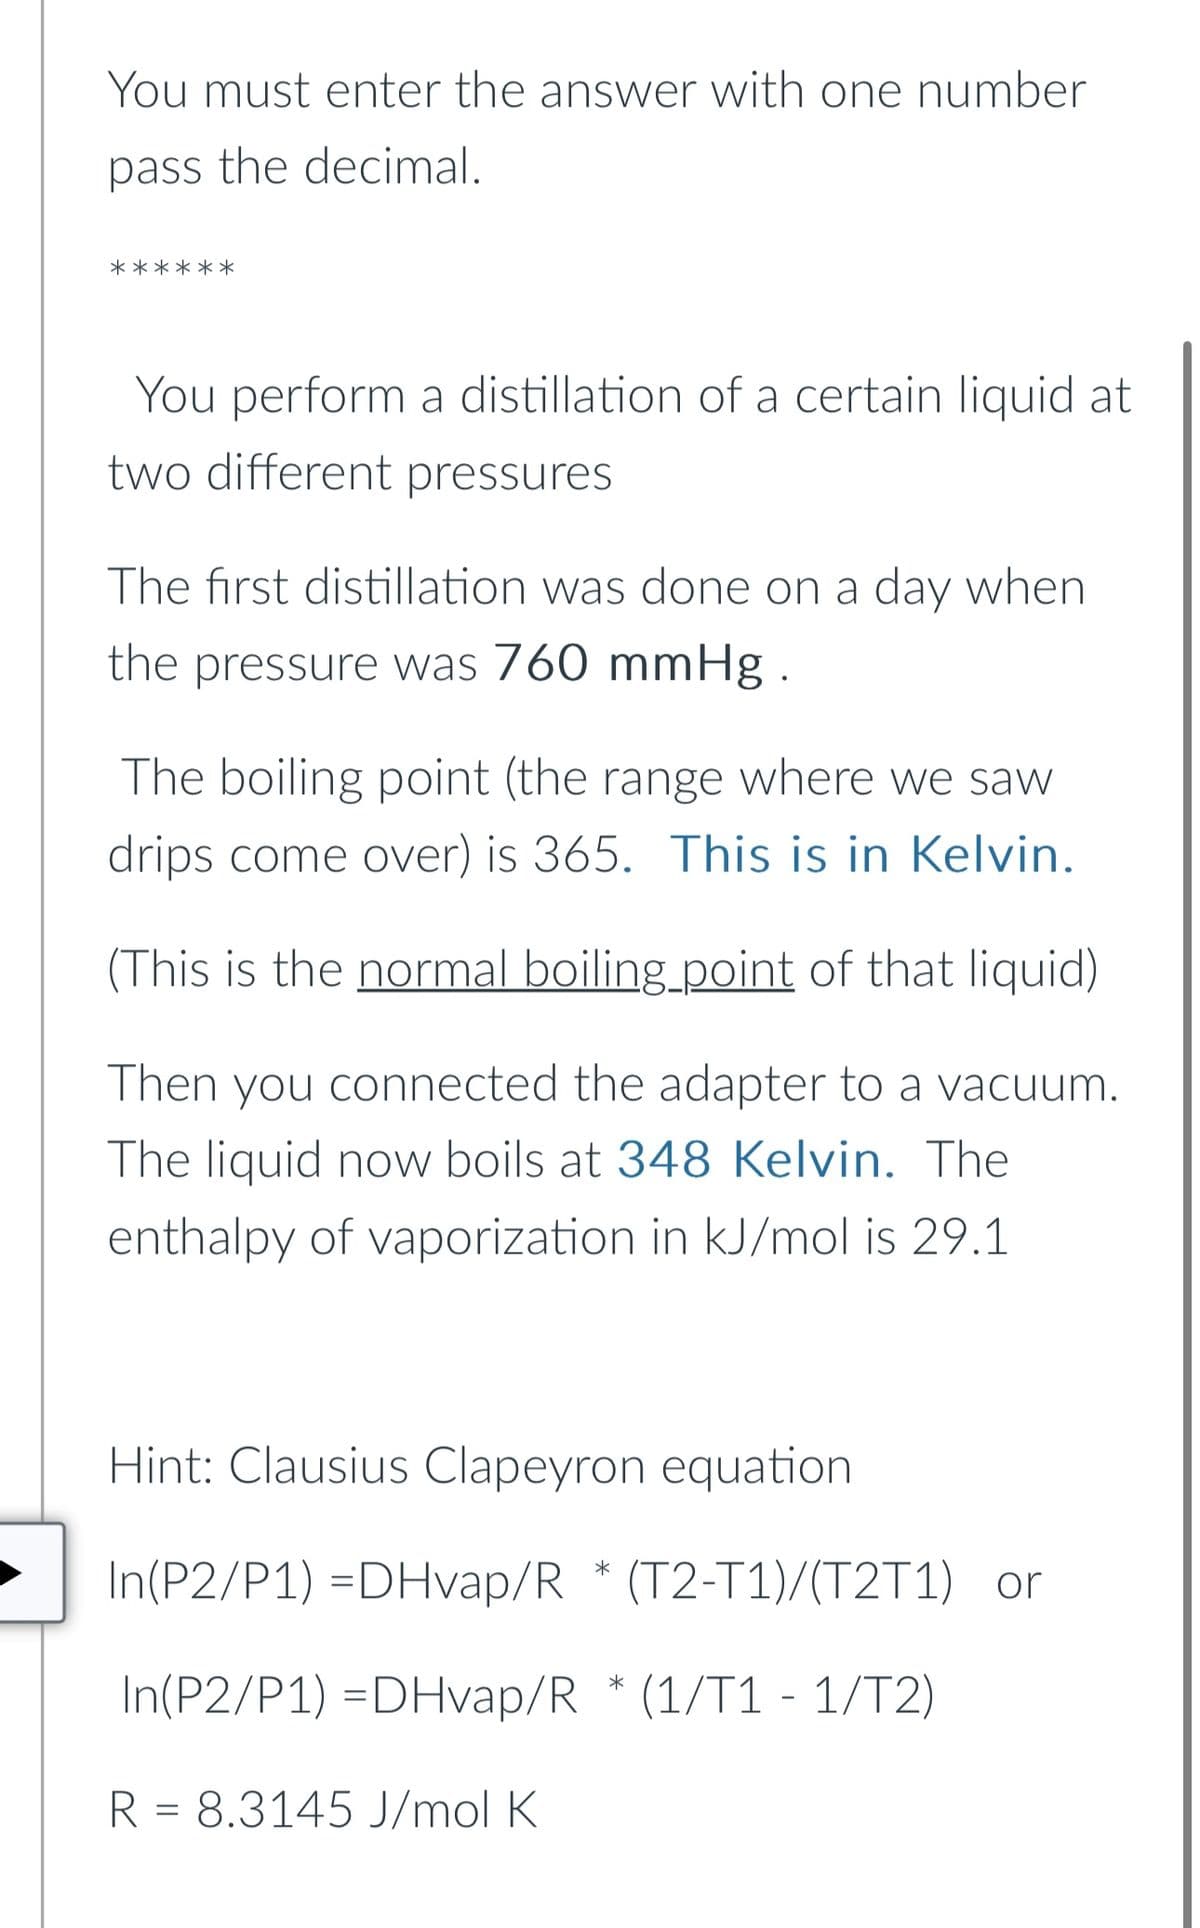 You must enter the answer with one number
pass the decimal.
**
You perform a distillation of a certain liquid at
two different pressures
The first distillation was done on a day when
the pressure was 760 mmHg.
The boiling point (the range where we saw
drips come over) is 365. This is in Kelvin.
(This is the normal boiling point of that liquid)
Then you connected the adapter to a vacuum.
The liquid now boils at 348 Kelvin. The
enthalpy of vaporization in kJ/mol is 29.1
Hint: Clausius Clapeyron equation
In(P2/P1) =DHvap/R* (T2-T1)/(T2T1) or
In(P2/P1) =DHvap/R* (1/T1 - 1/T2)
R = 8.3145 J/mol K